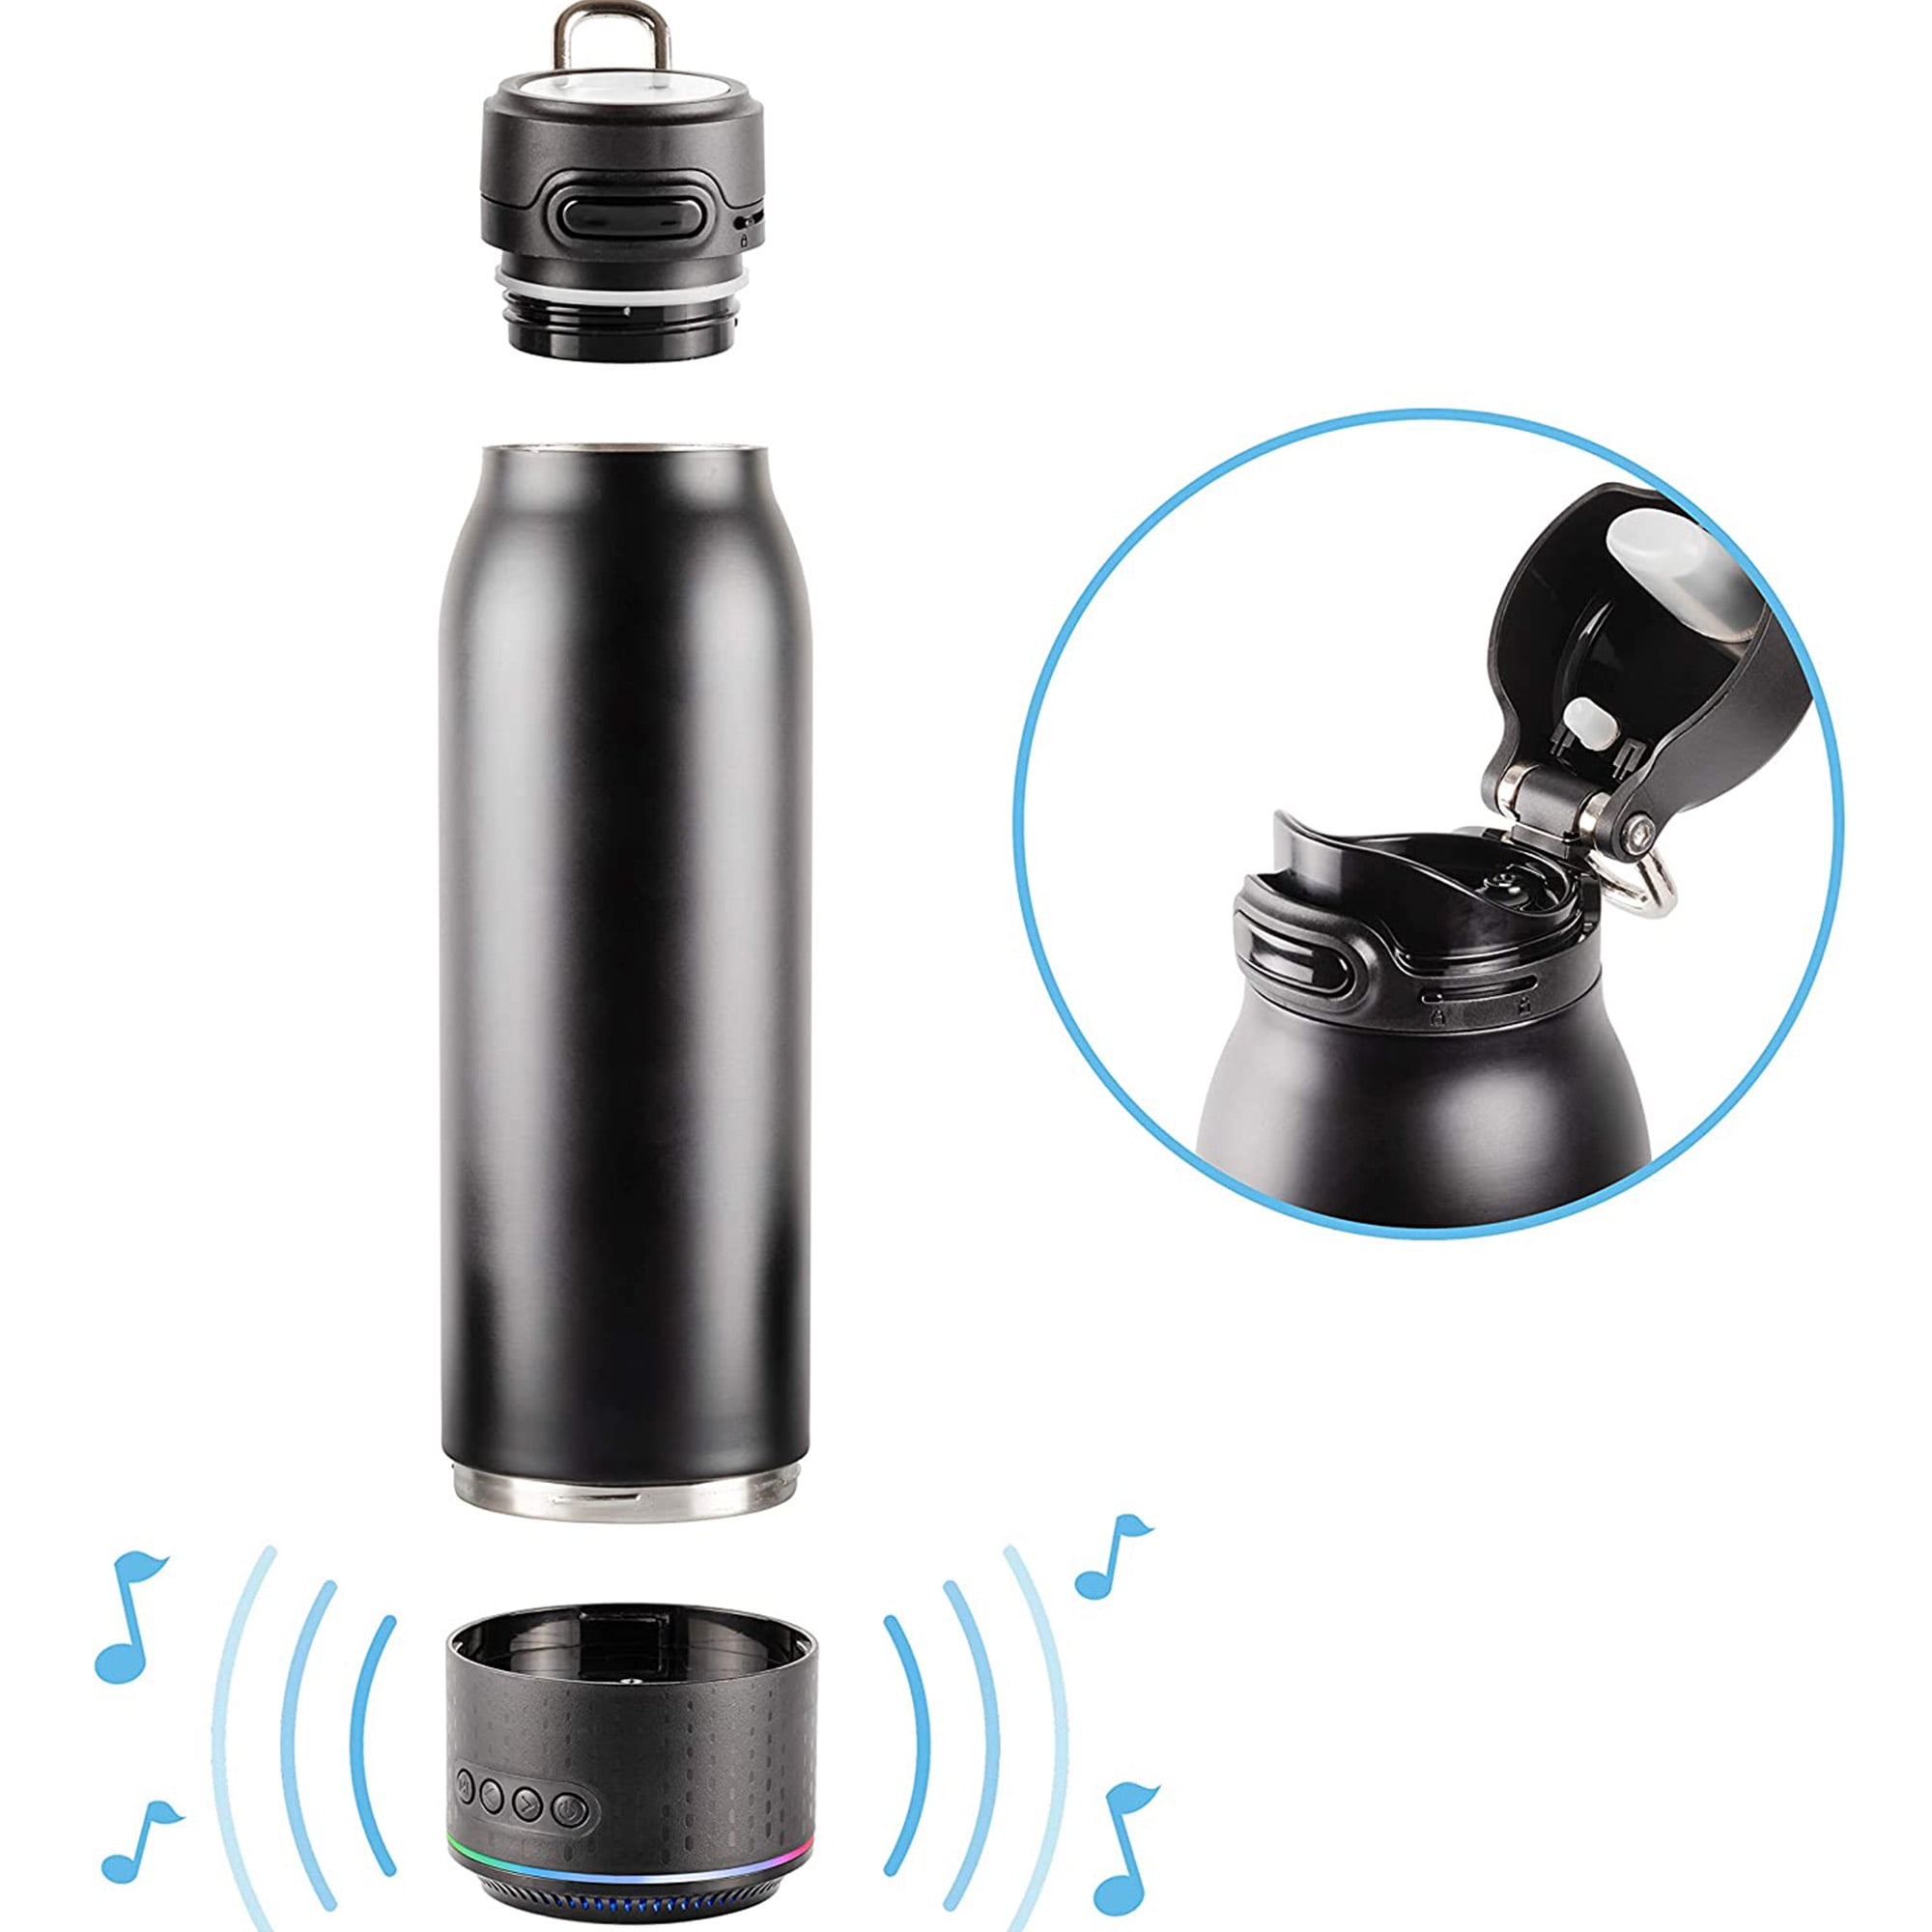 Ultimaxx Vacuum Insulated Premium Water Bottle (Navy) with Rechargeable  Bluetooth Speaker and Xtreme Mini Bluetooth Remote. Remote Doubles as  Gaming Joystick/Mouse for Smartphone Apps 